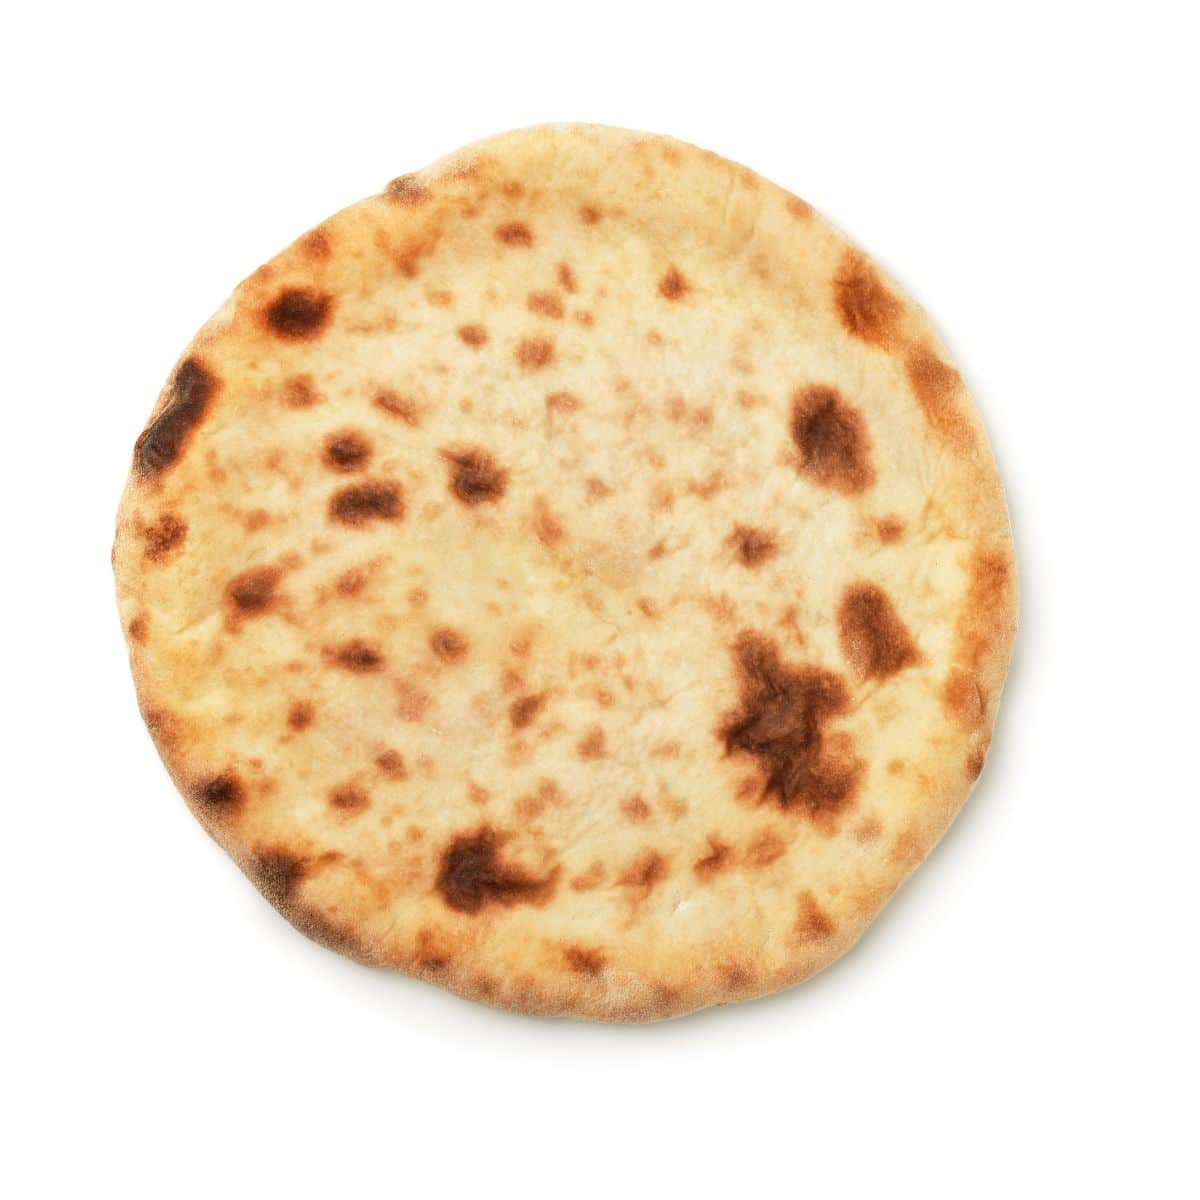 Flatbread on a white background.